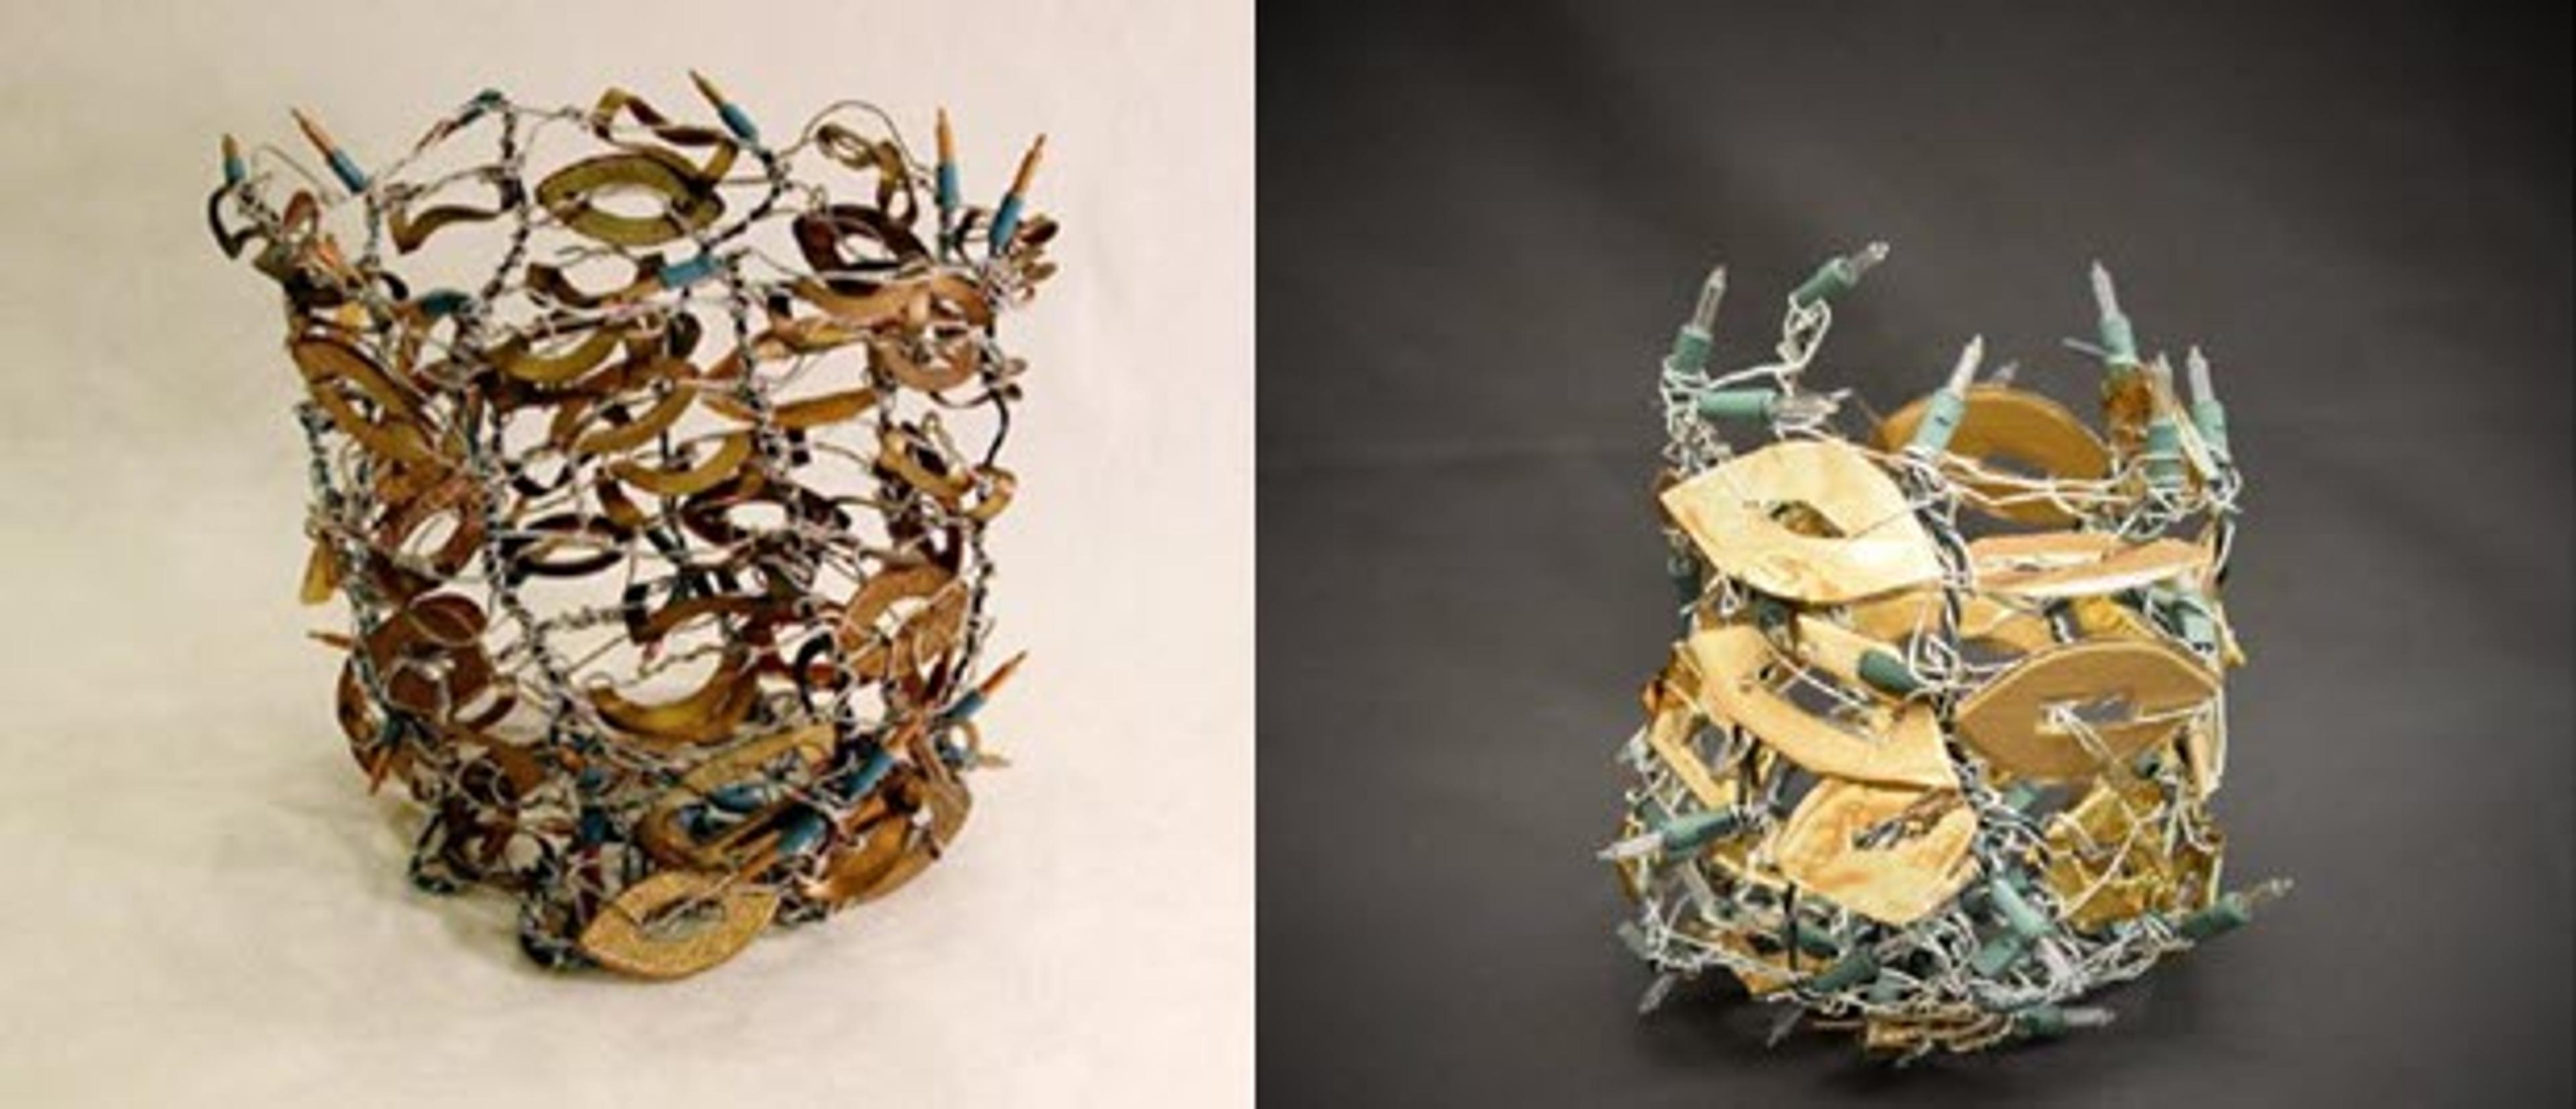 left image: Marita Dingus, Untitled Bowl, c. 2055, wire and found objects, 7 1/2” x 8” x 8” ; right image: Tactile Reproduction created by Mallory Lind inspired by Dingus’ Untitled Bowl